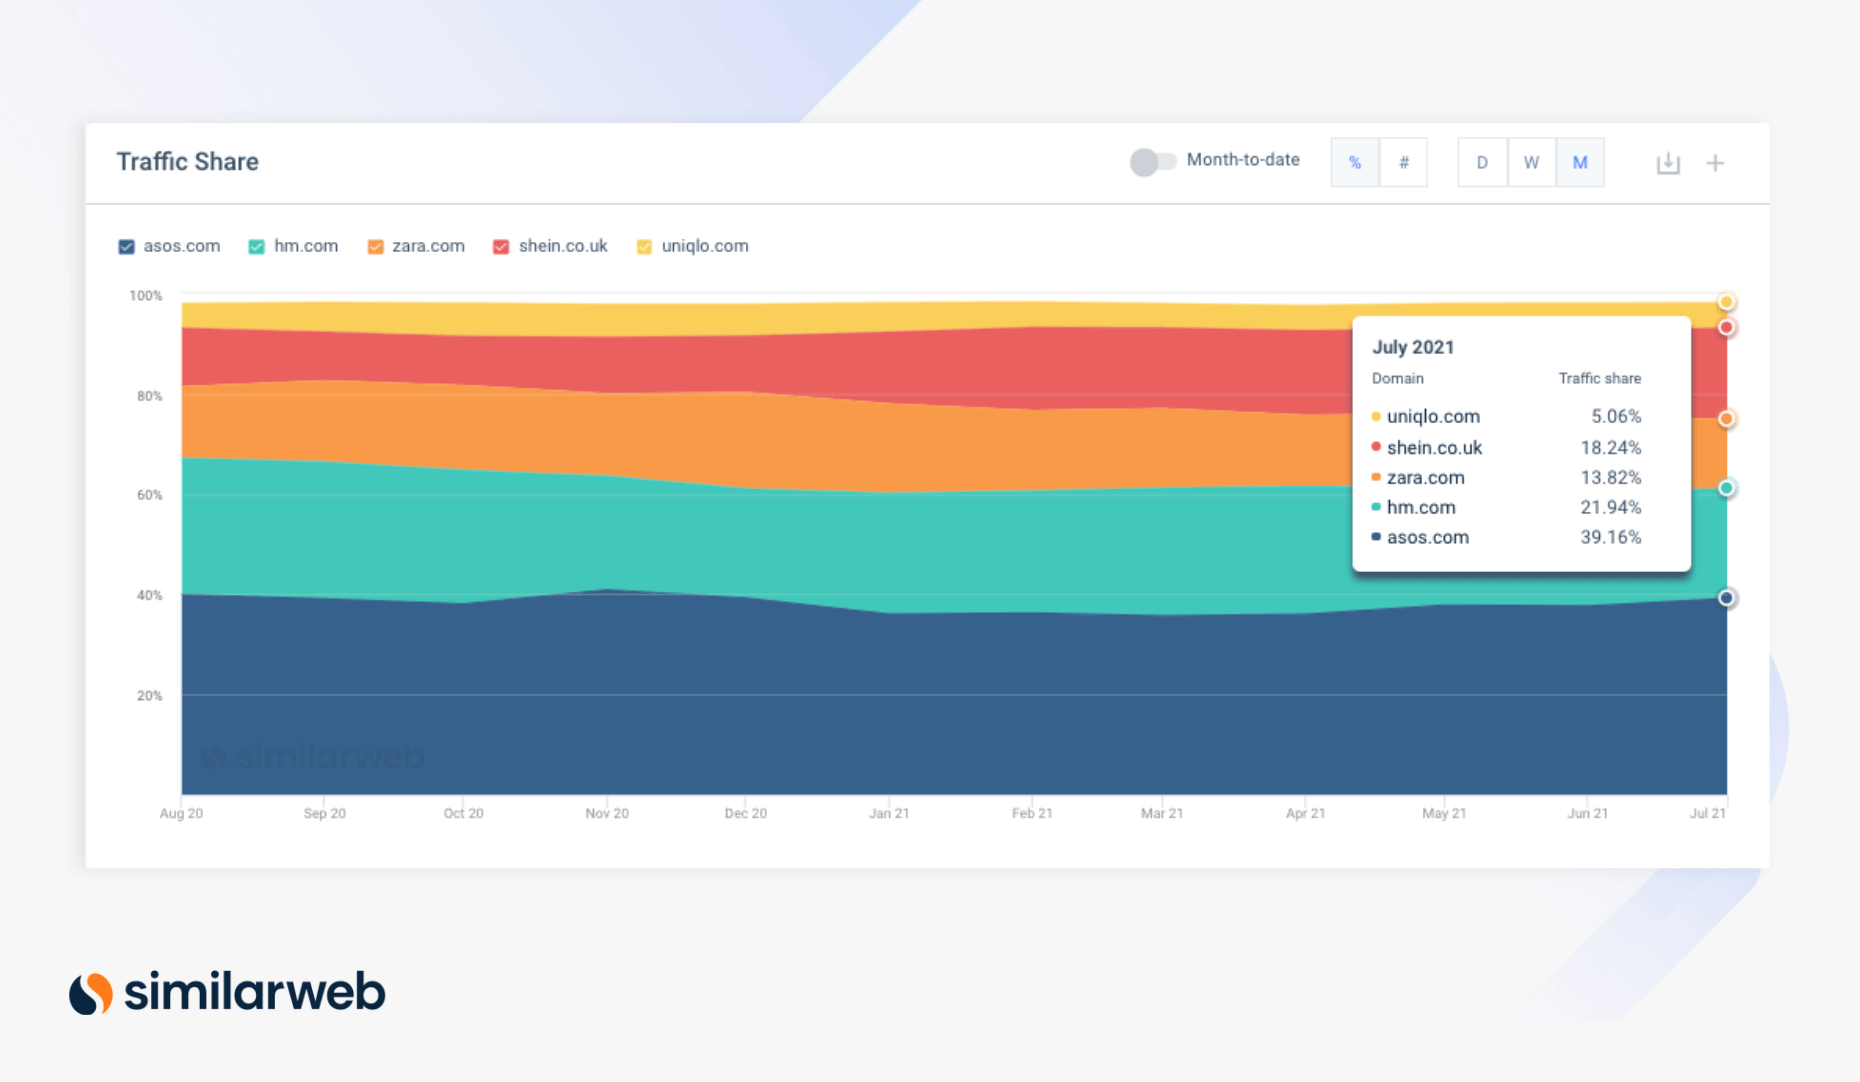 A screenshot from Similarweb showing the traffic share of the top 5 fast fashion websites in the U.K